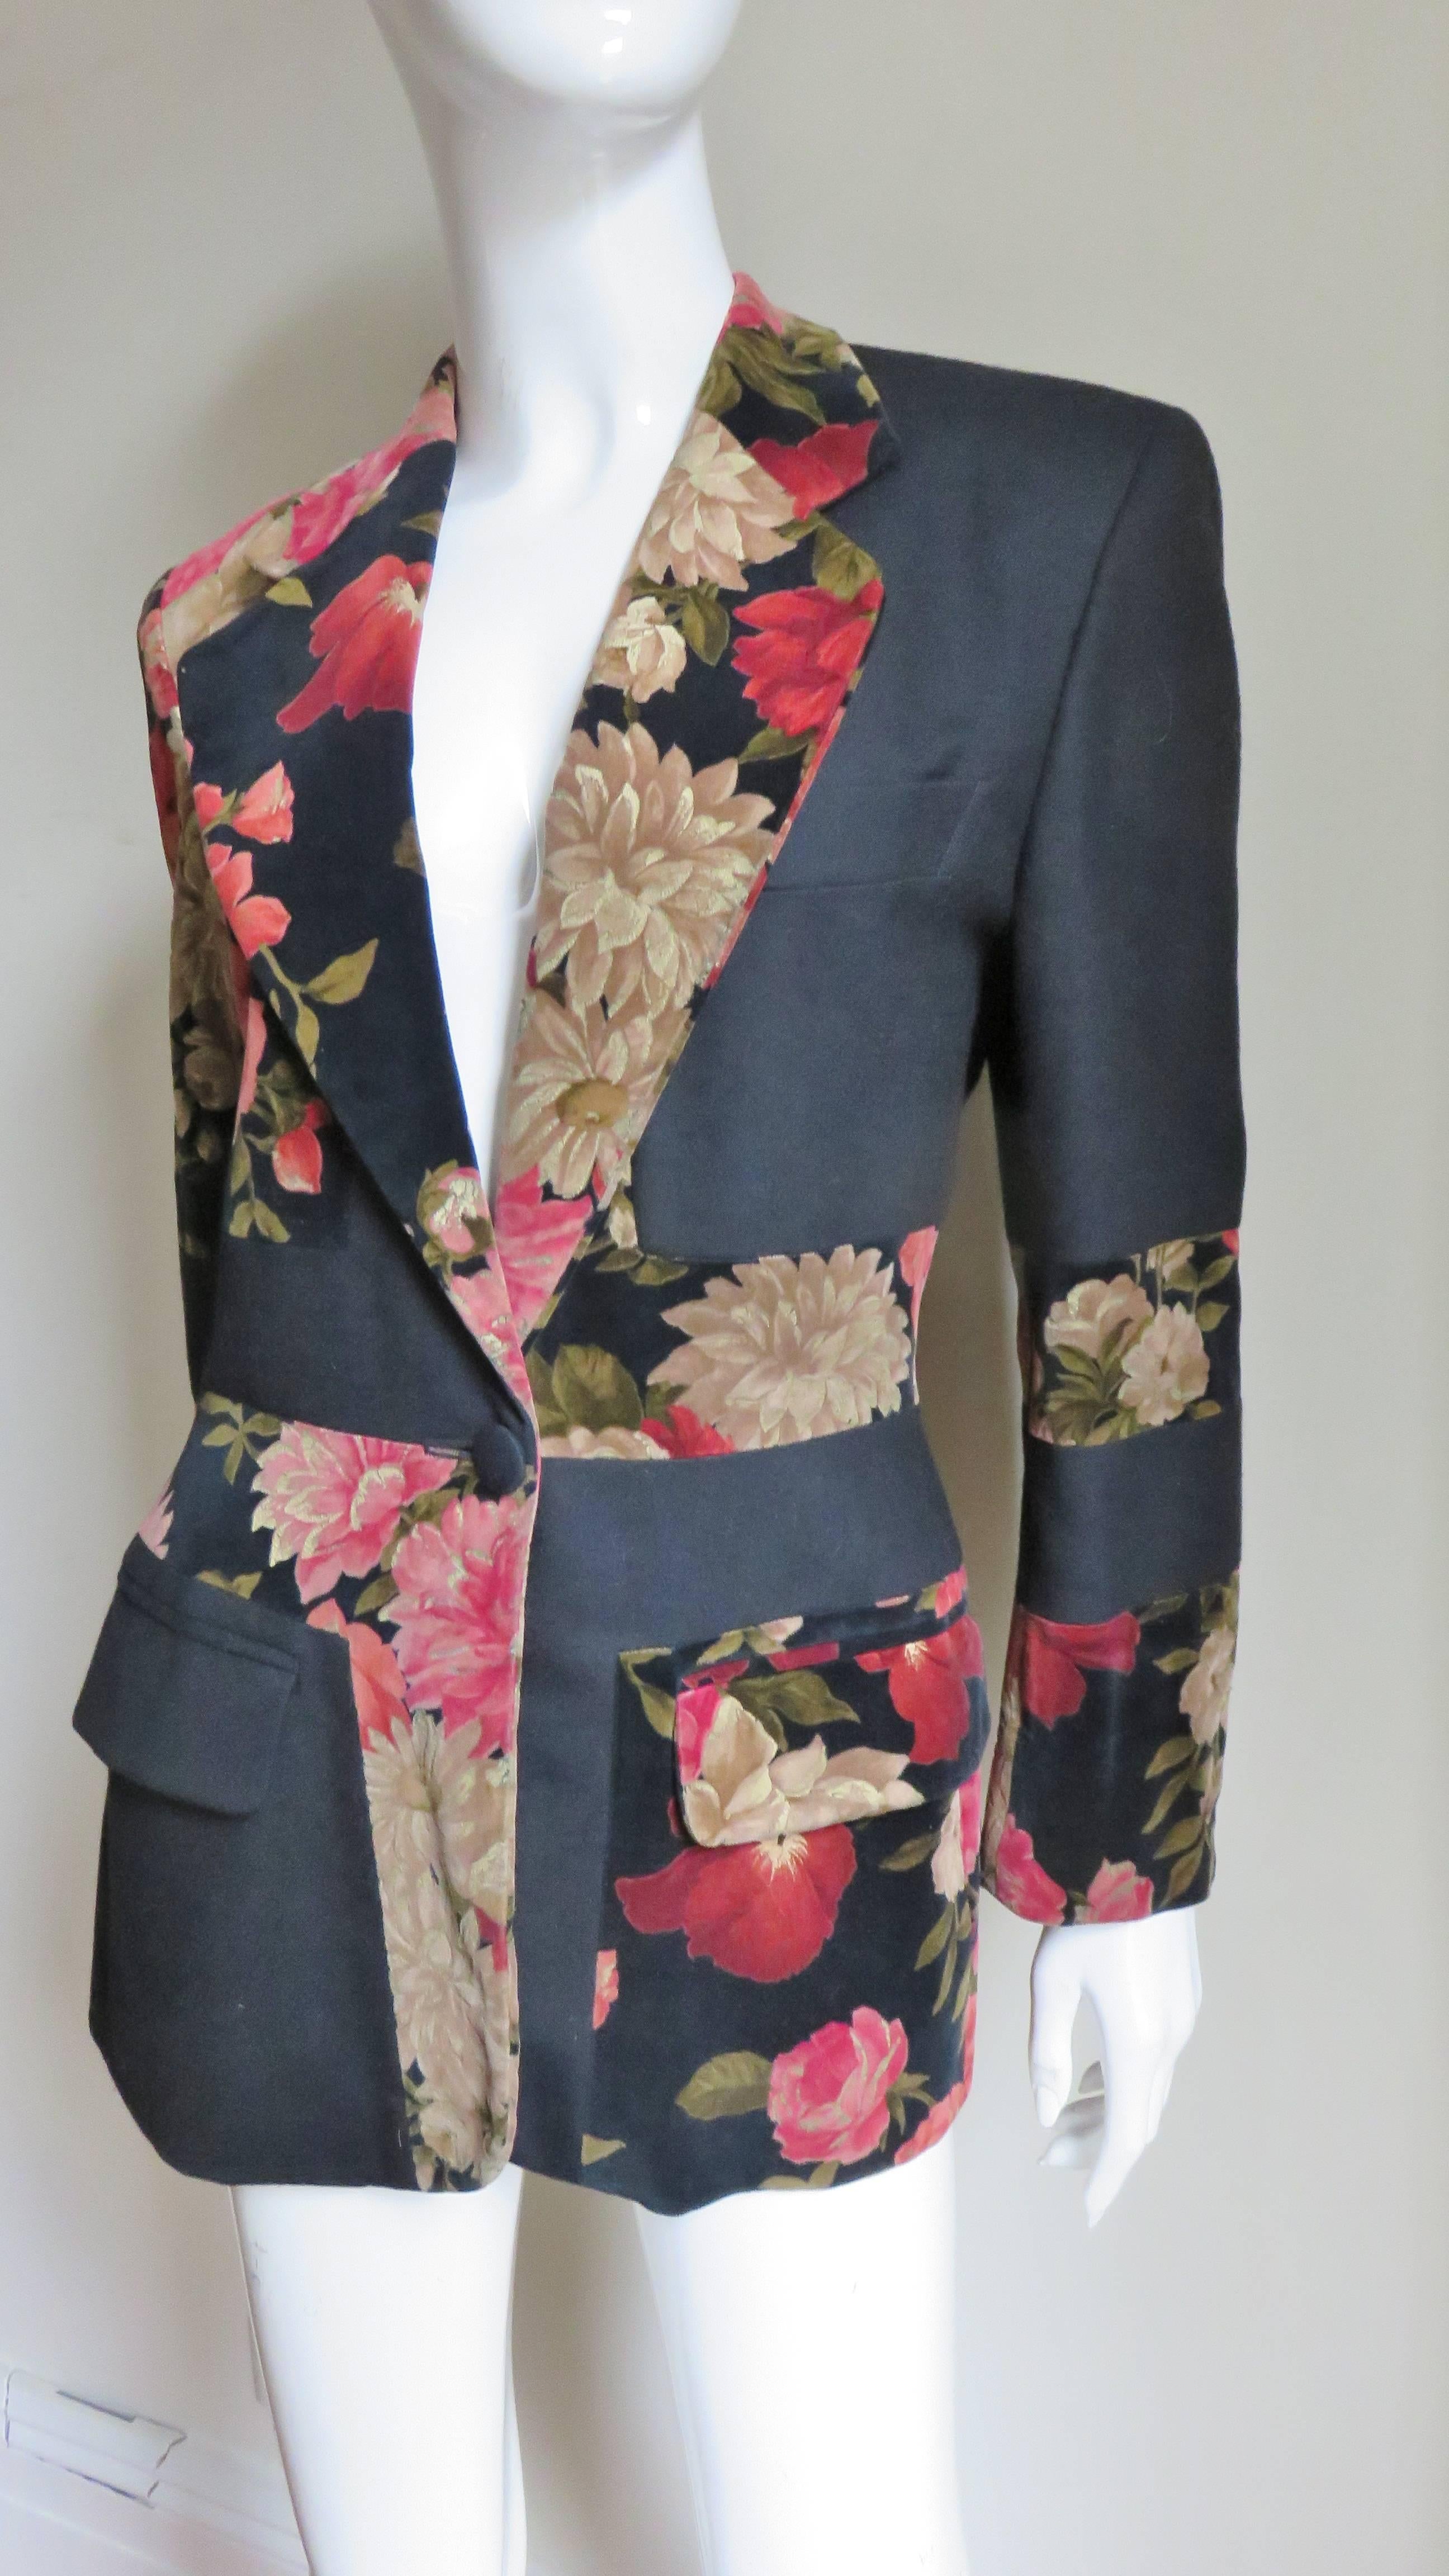 A fabulous jacket from Moschino Couture. It is a blazer style jacket with 2 front flap pockets, a breast pocket, a lapel collar and slight shoulder padding. It has an alternating fabrics-red and gold flowers on black velvet with solid black wool